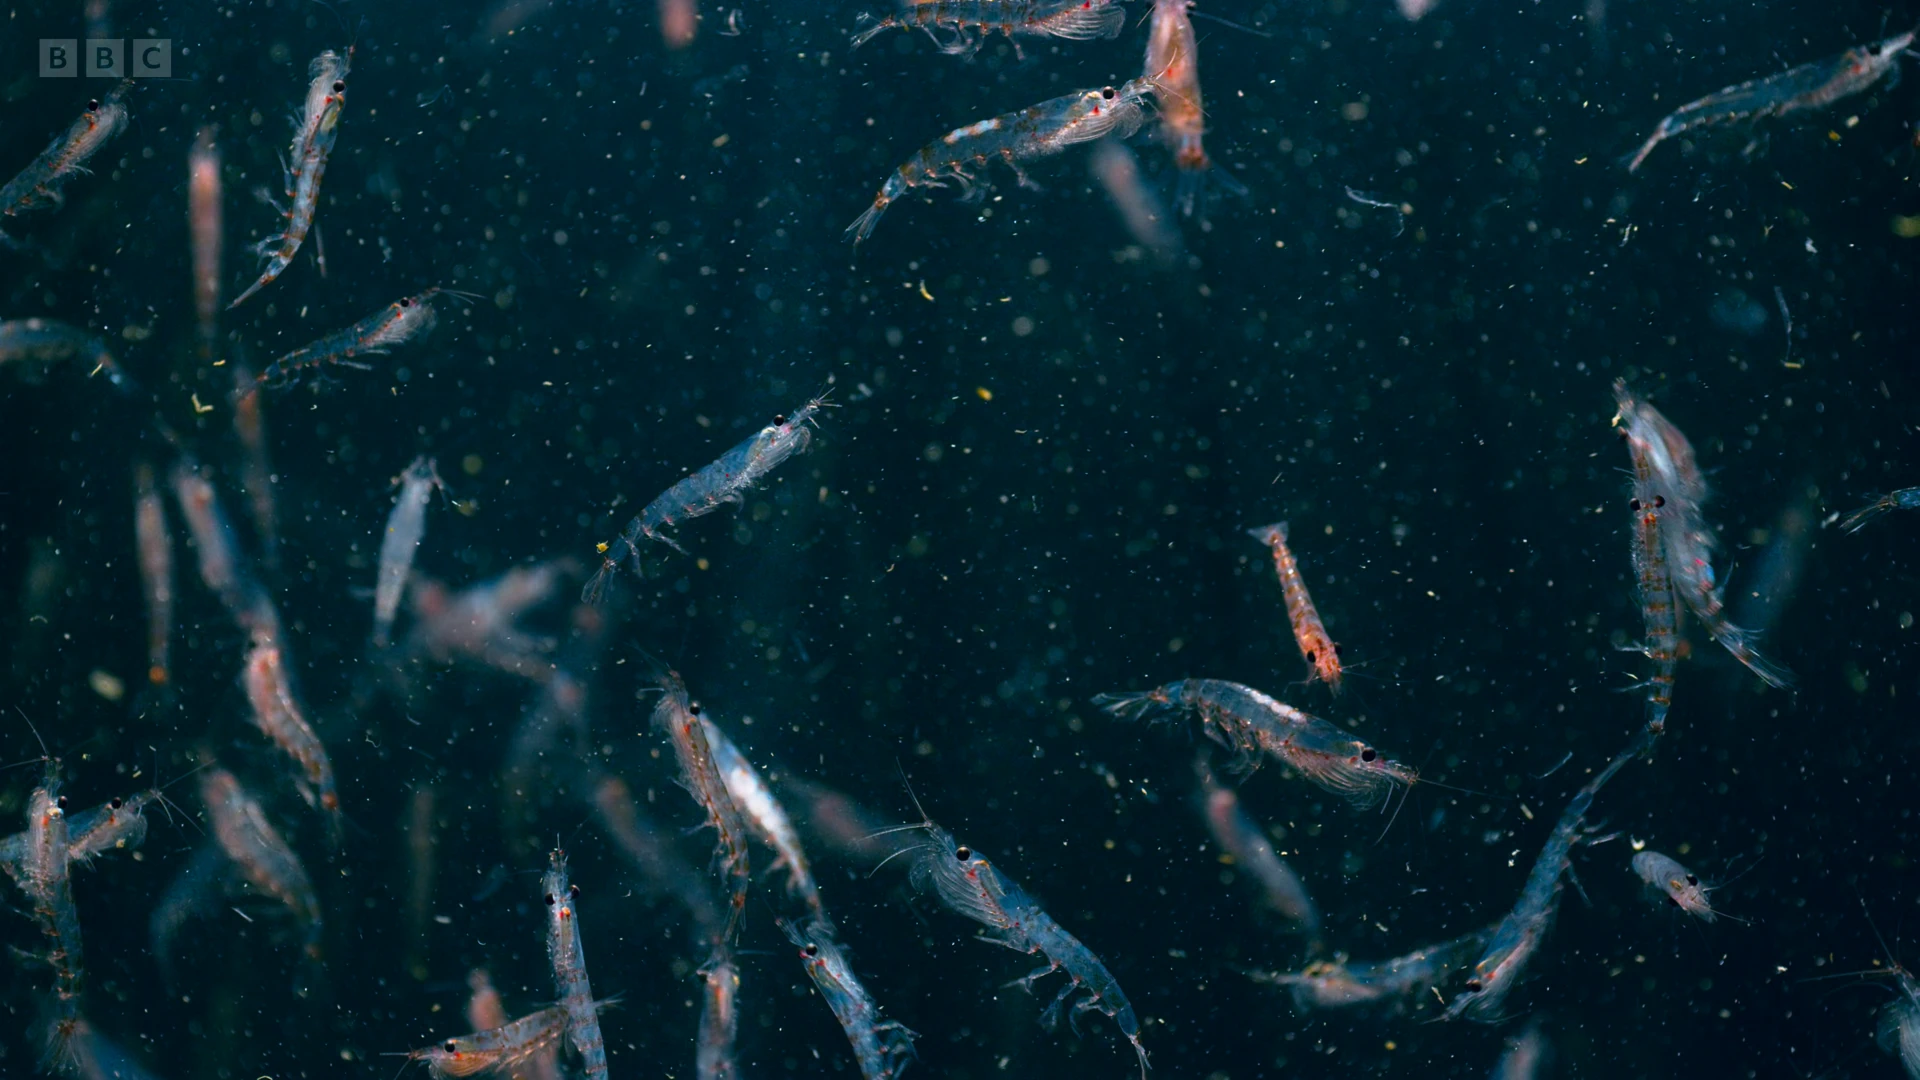 Antarctic krill (Euphausia superba) as shown in Seven Worlds, One Planet - Antarctica